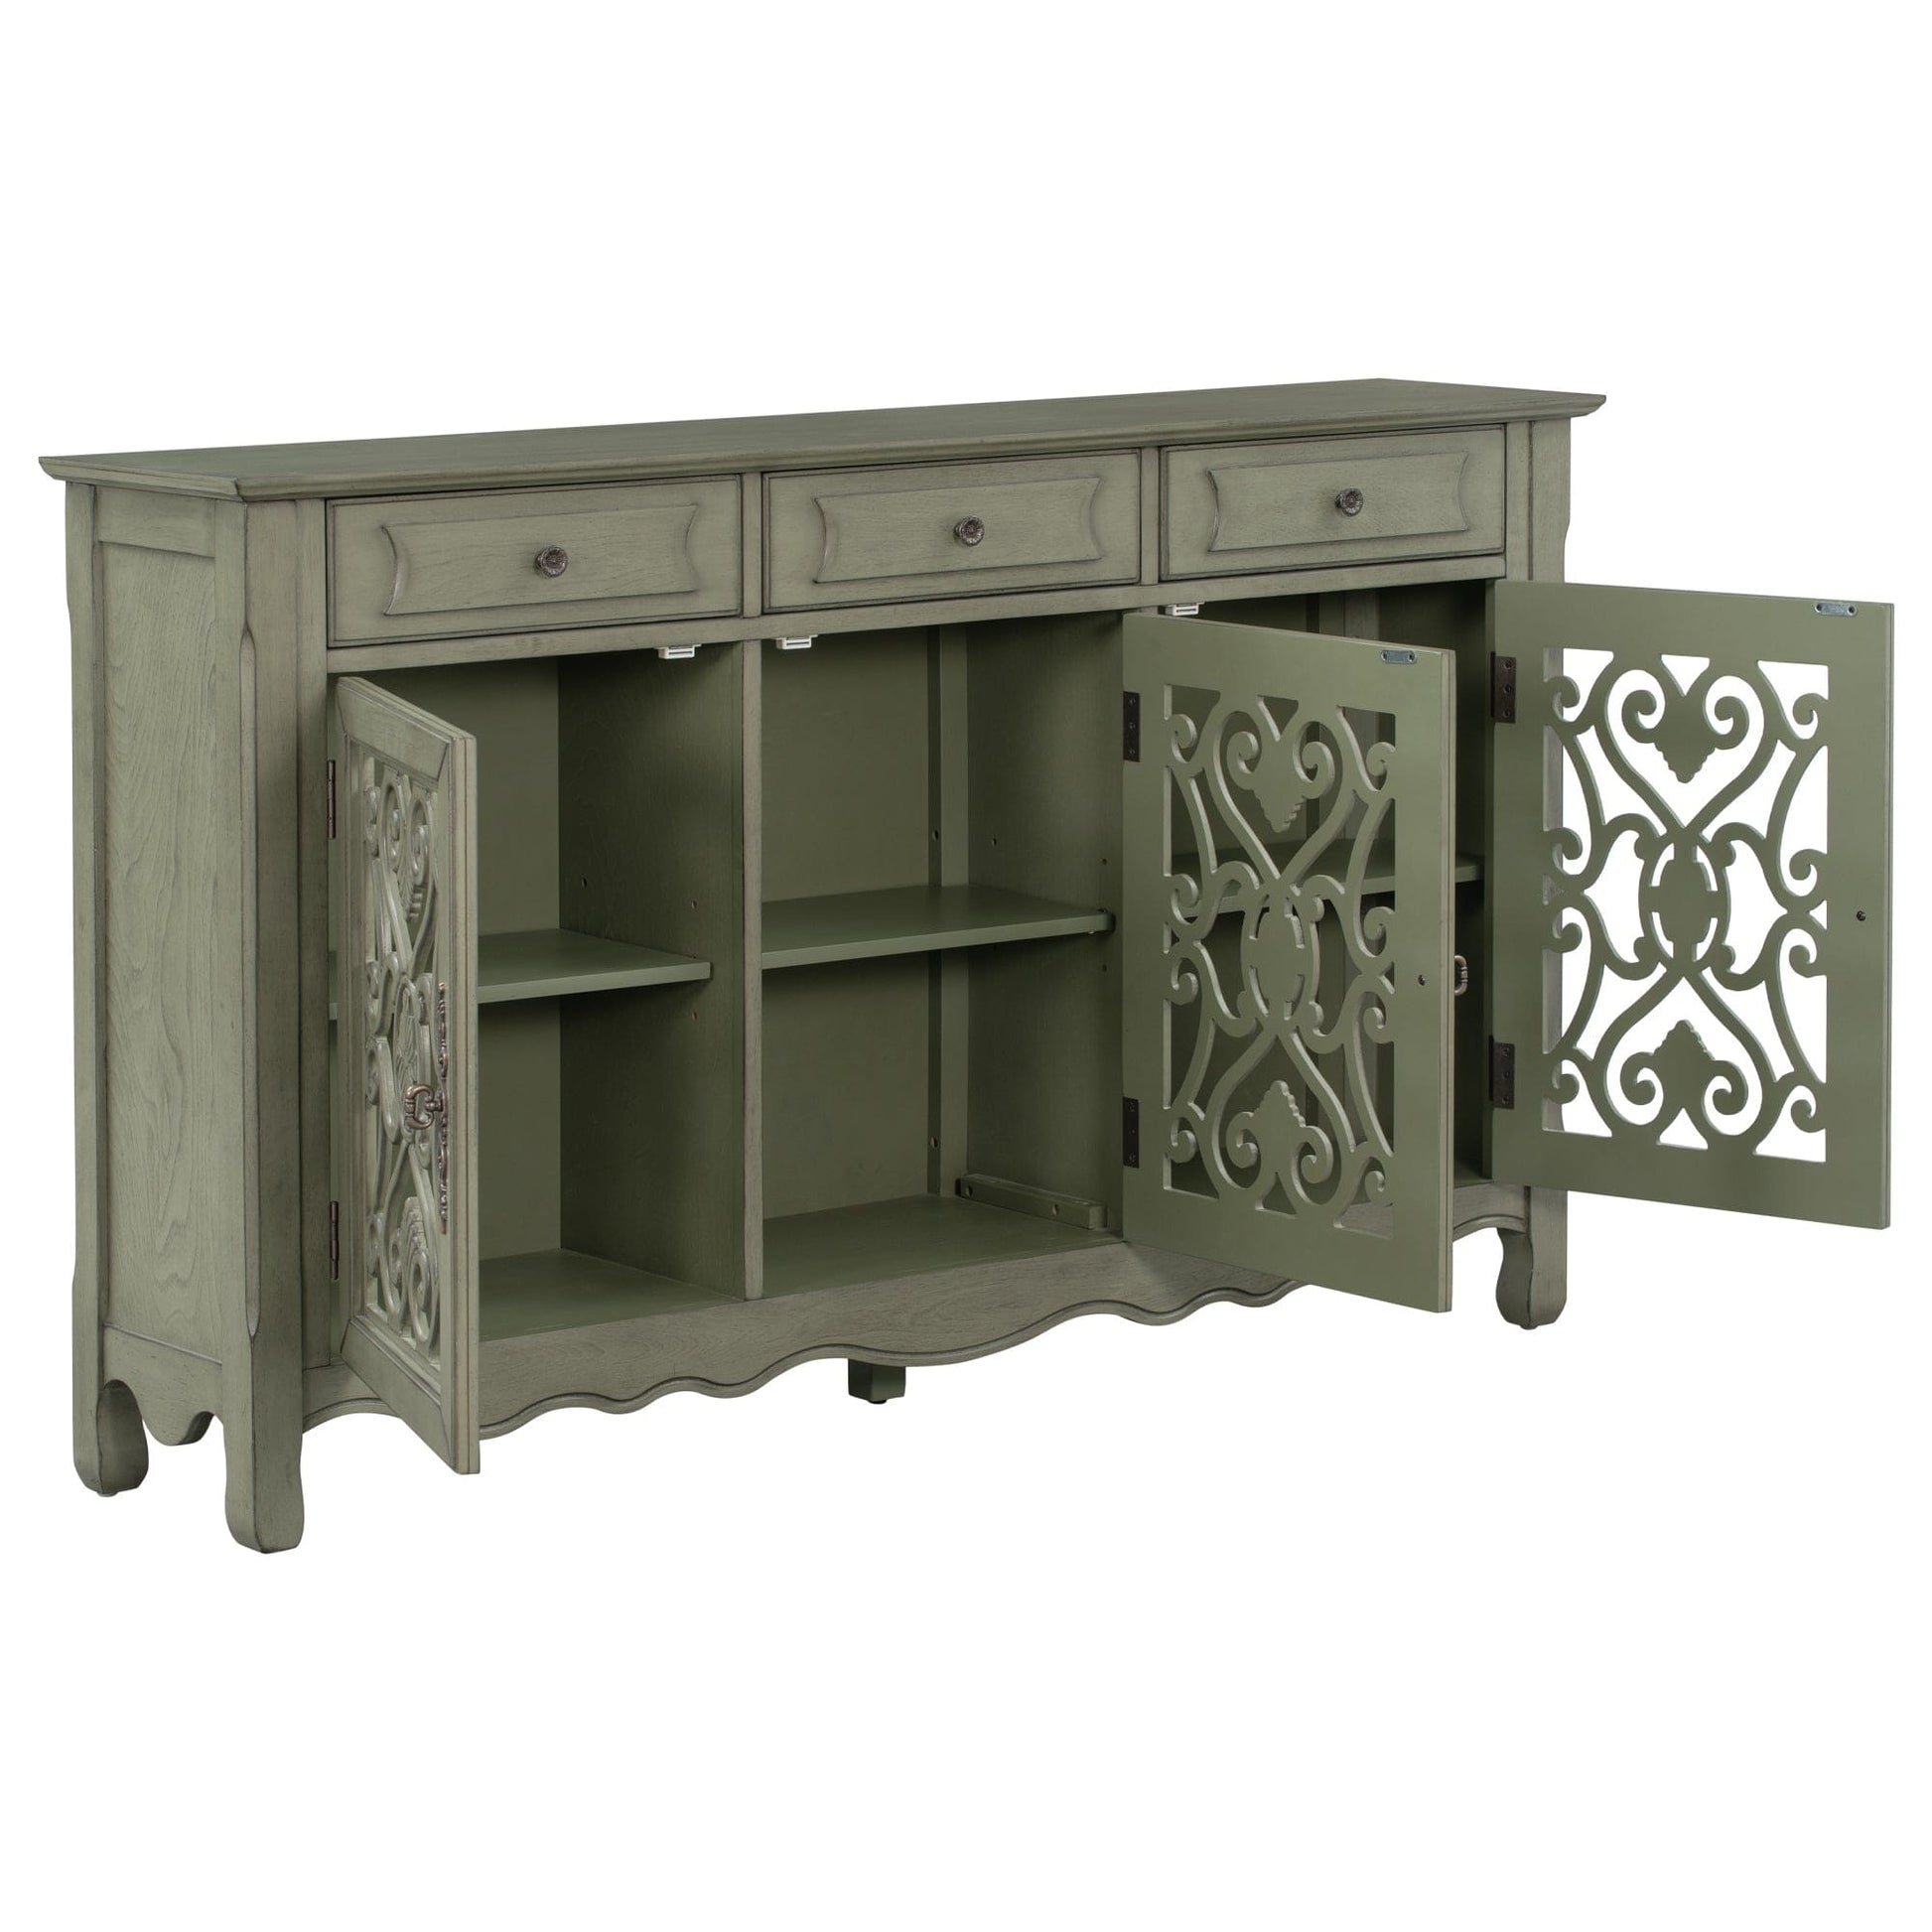 1st Choice Furniture Direct Cabinet 1st Choice U-STYLE 59.8" Modern Accent Cabinet with 3 Doors & Drawers